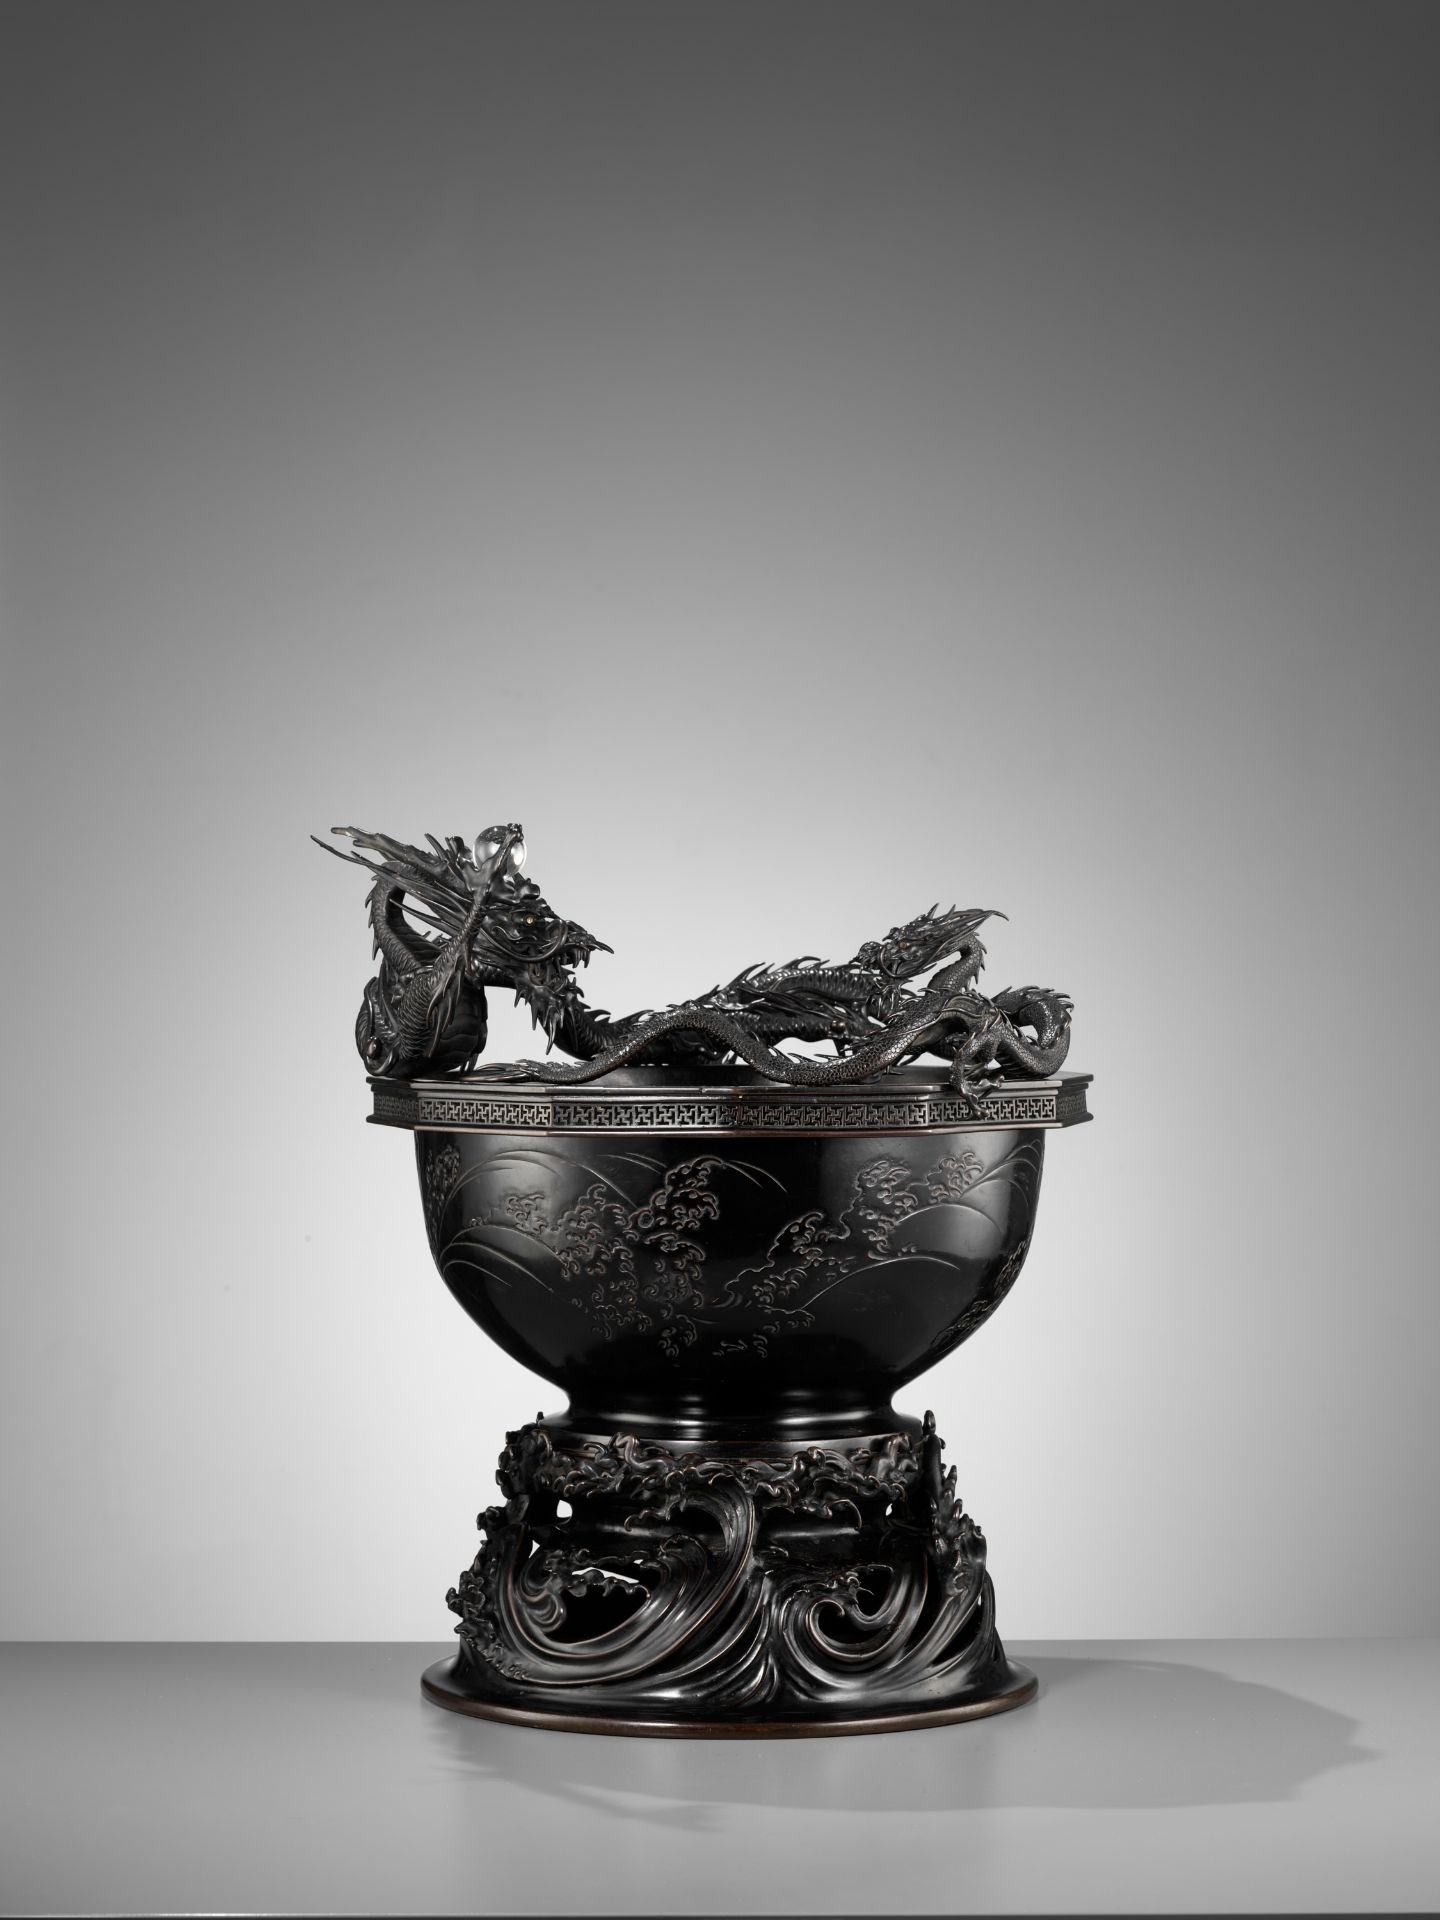 HIDEMITSU: A LARGE AND IMPRESSIVE BRONZE BOWL WITH TWO DRAGONS - Image 6 of 16